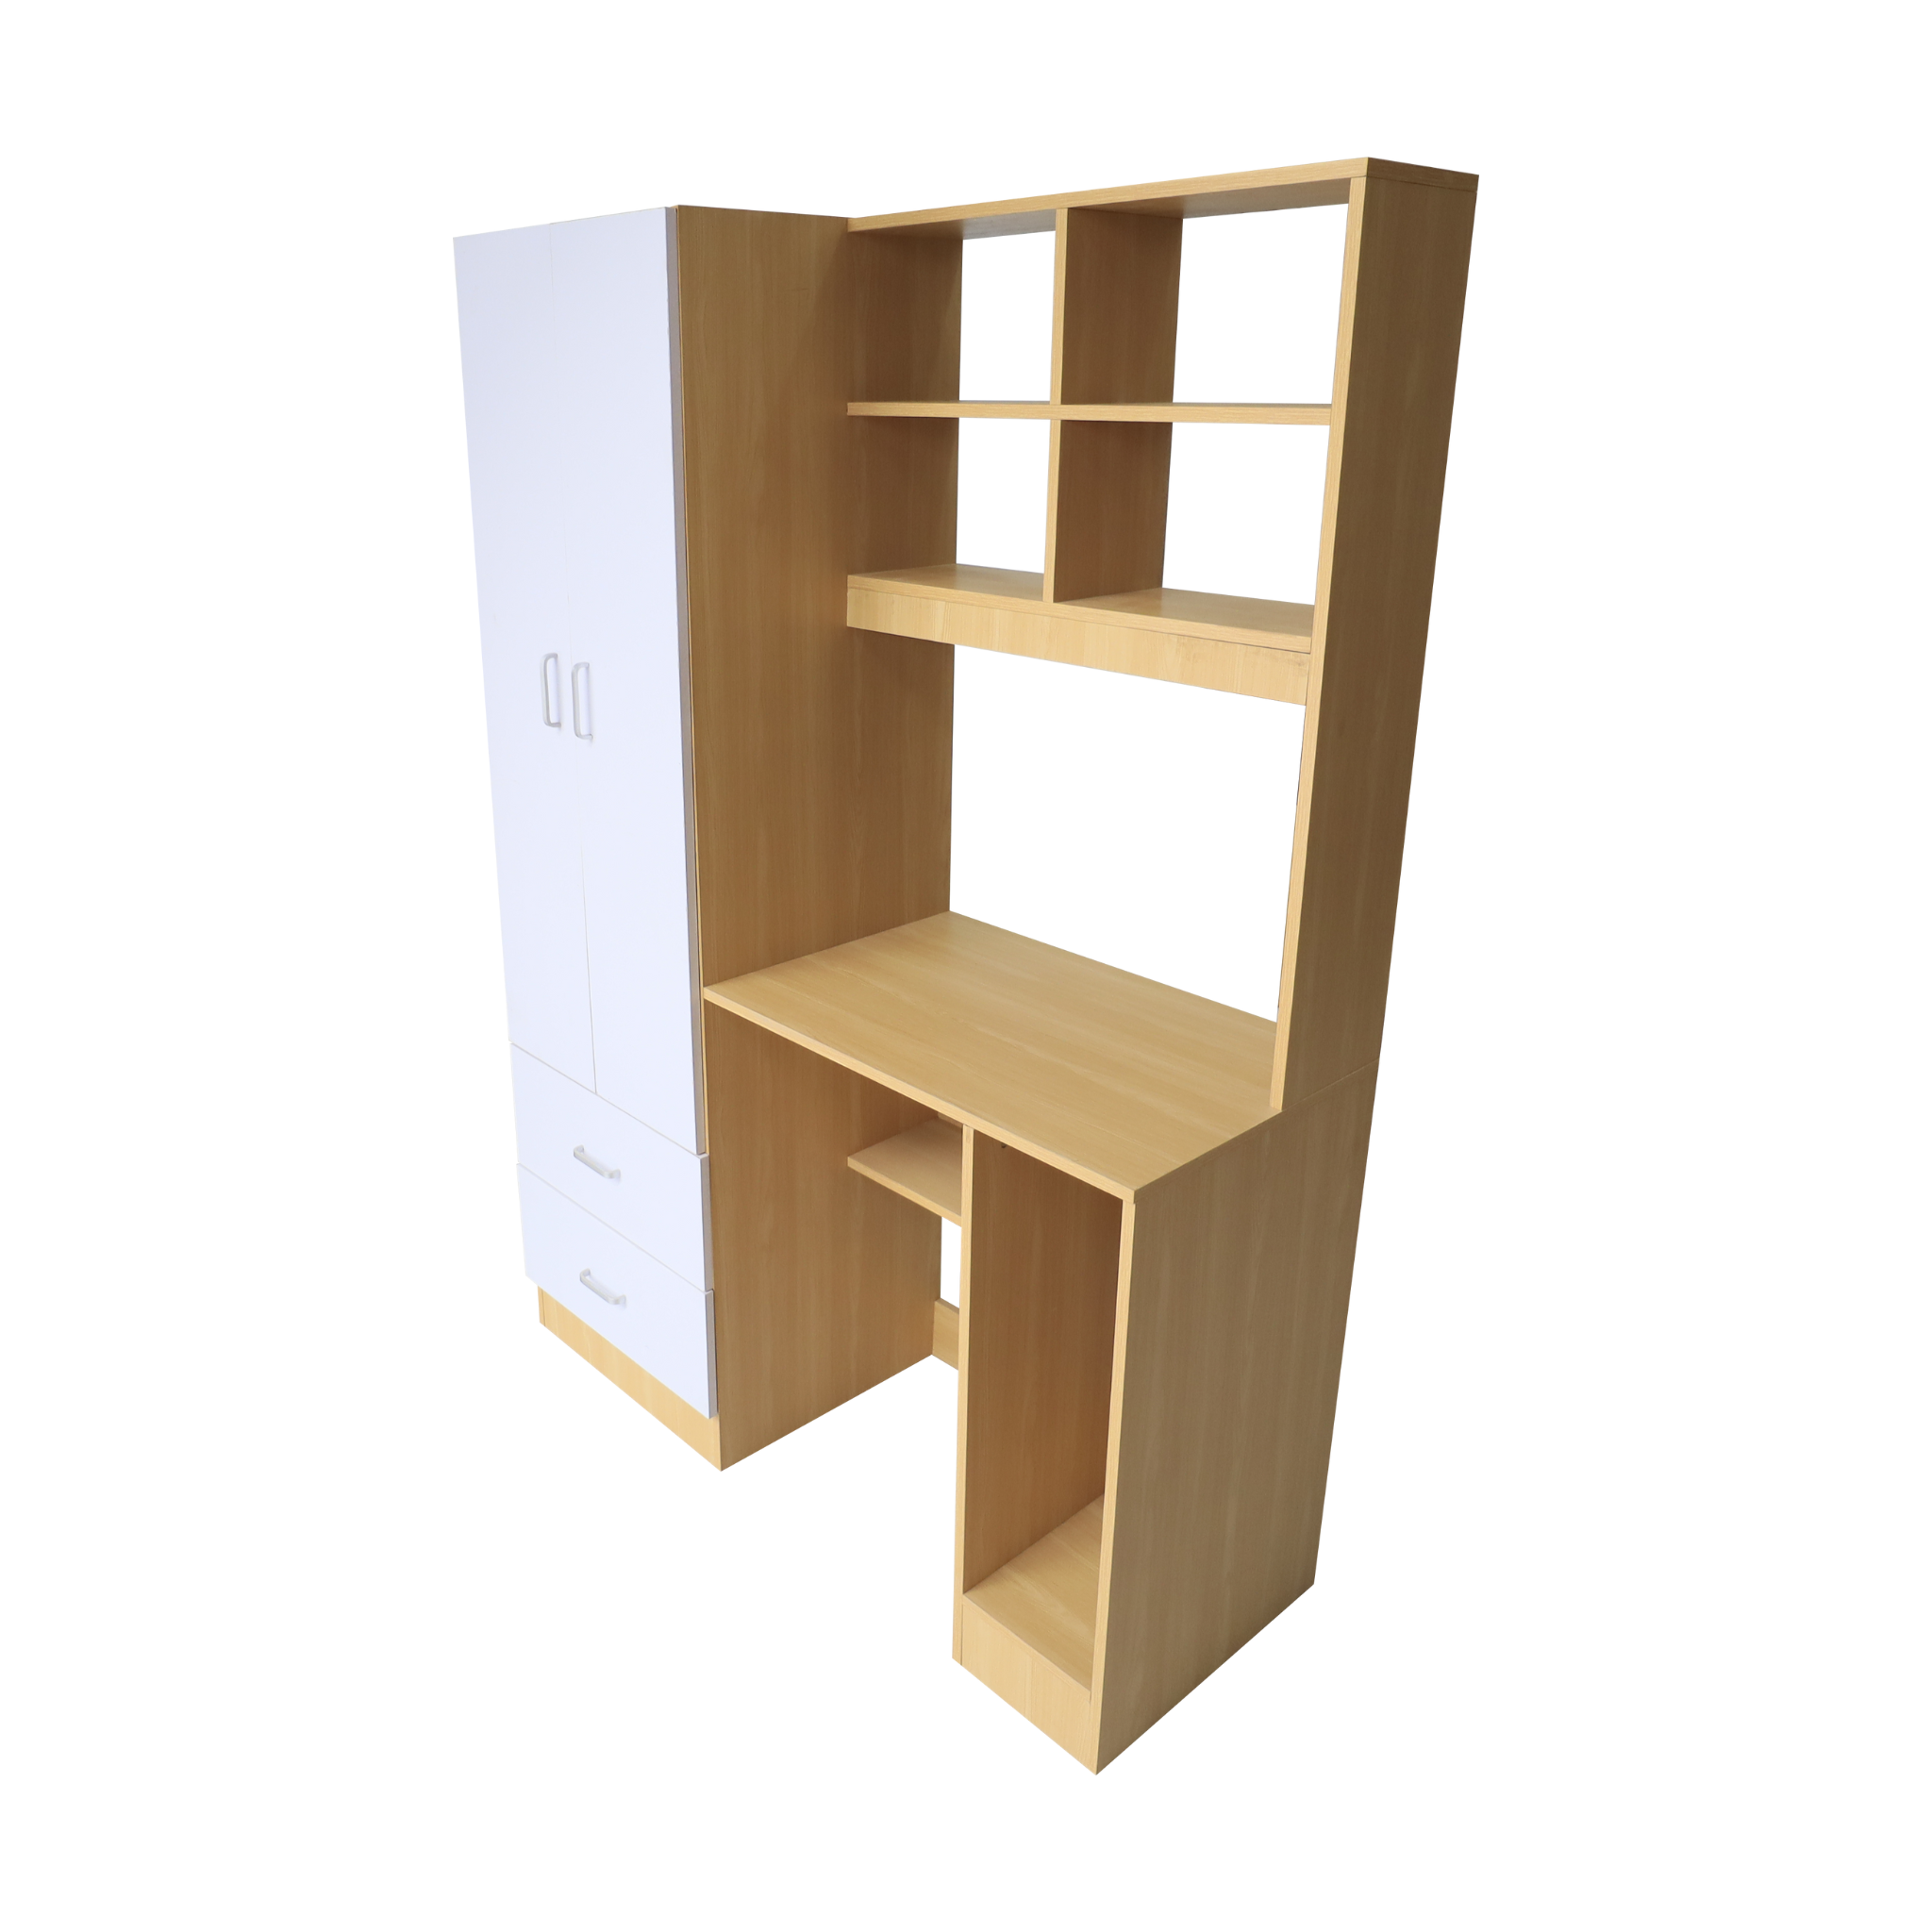 JUSTIN Laminated Study Table with Cabinet AF Home